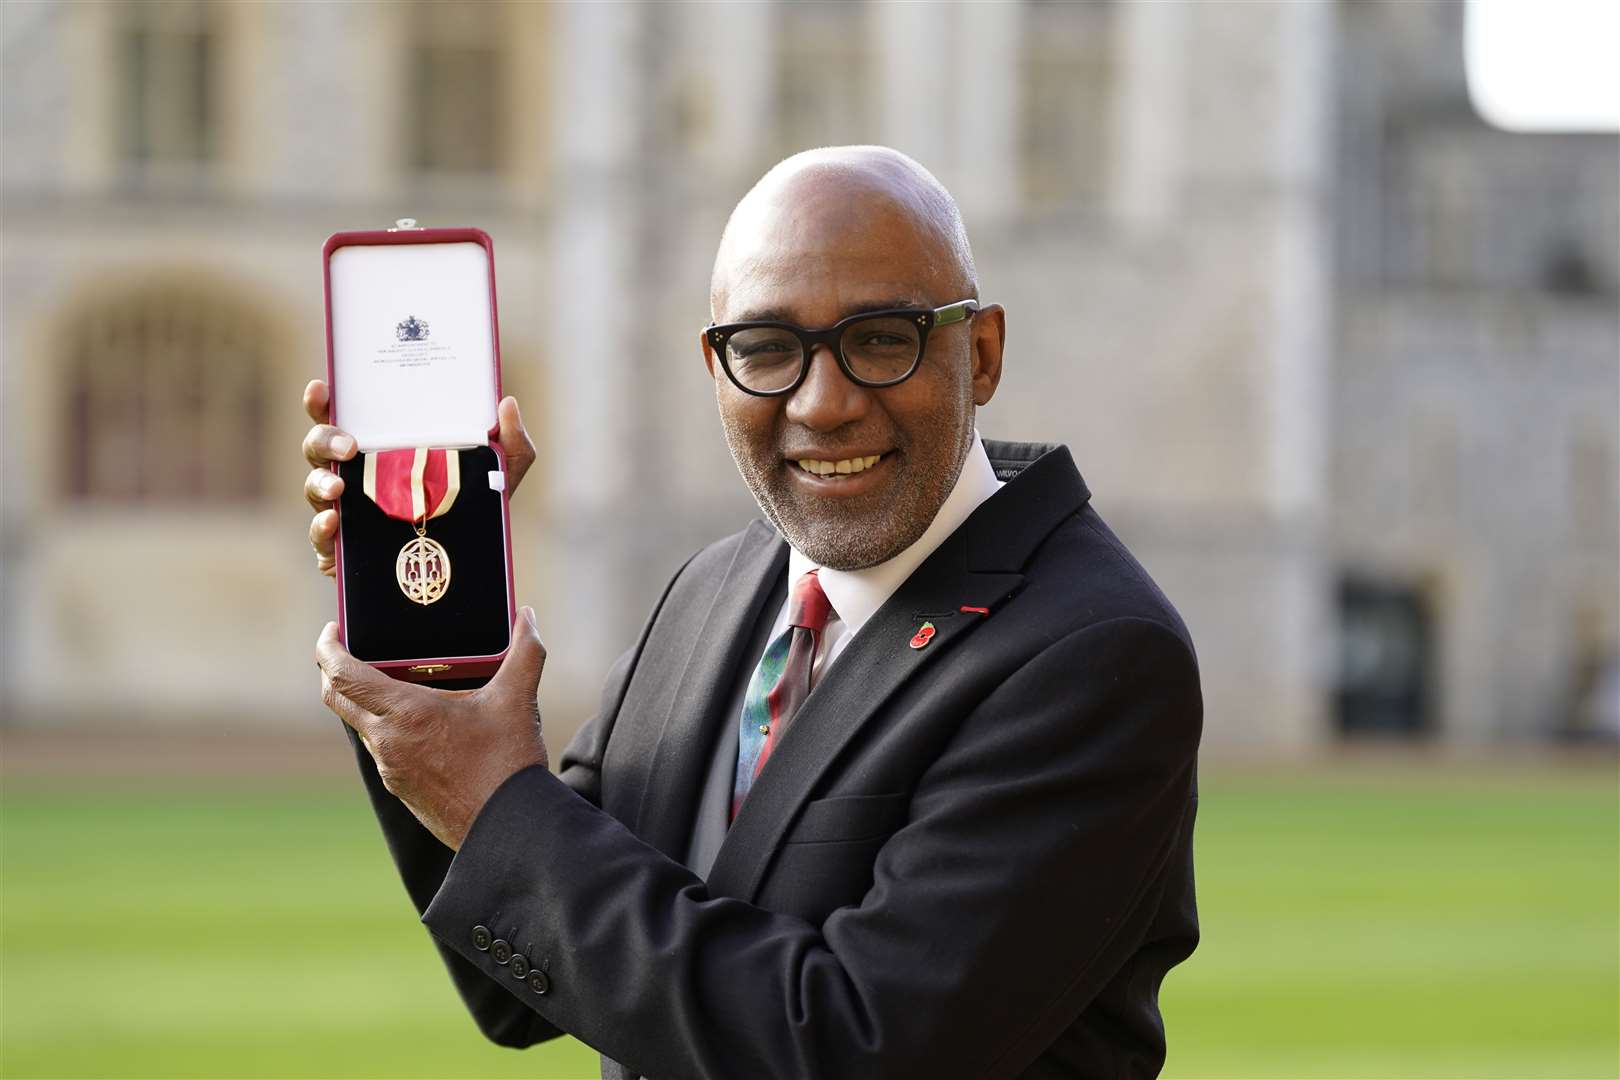 Sir Trevor Phillips after being made a Knight Bachelor by the Prince of Wales during an investiture ceremony at Windsor Castle (Andrew Matthews/PA)